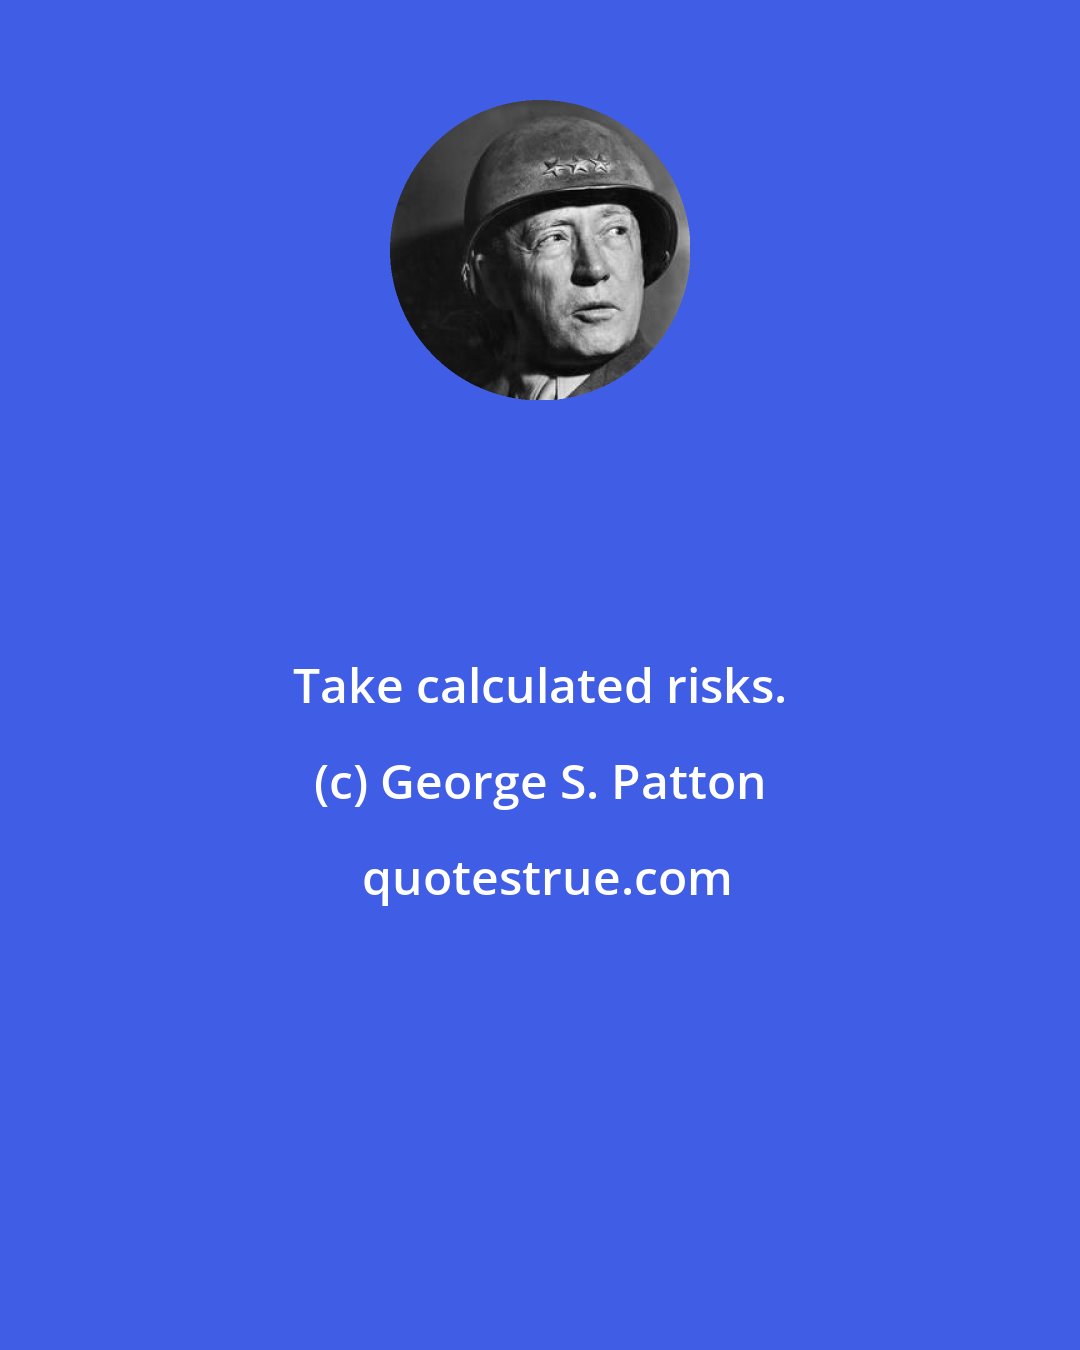 George S. Patton: Take calculated risks.